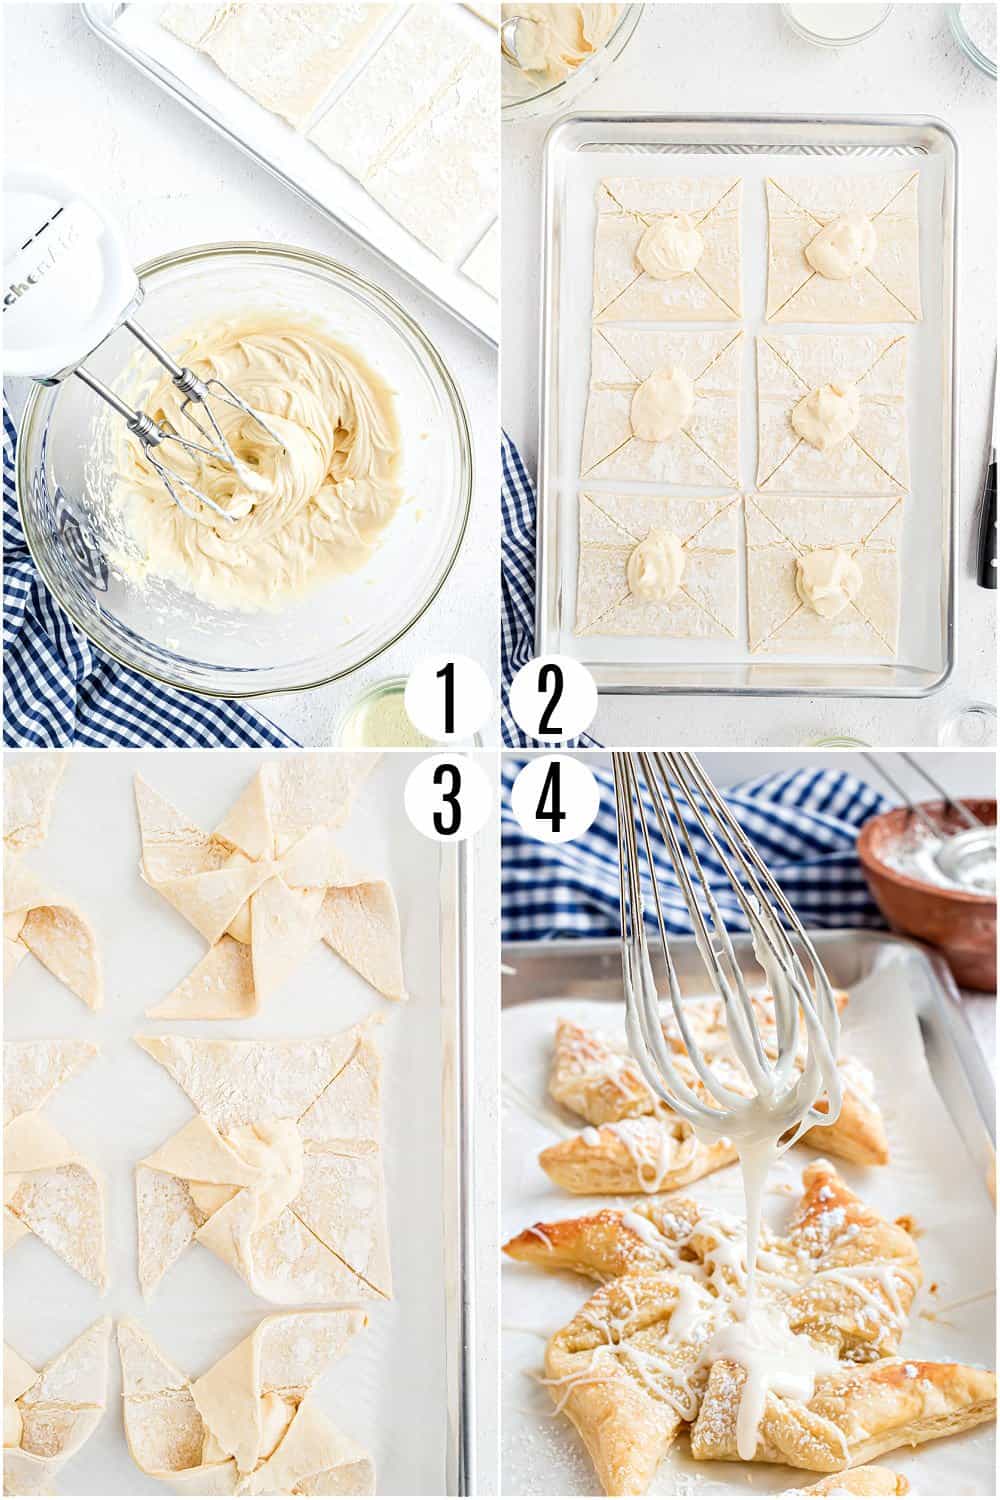 Step by step photos showing how to make cheese danishes.